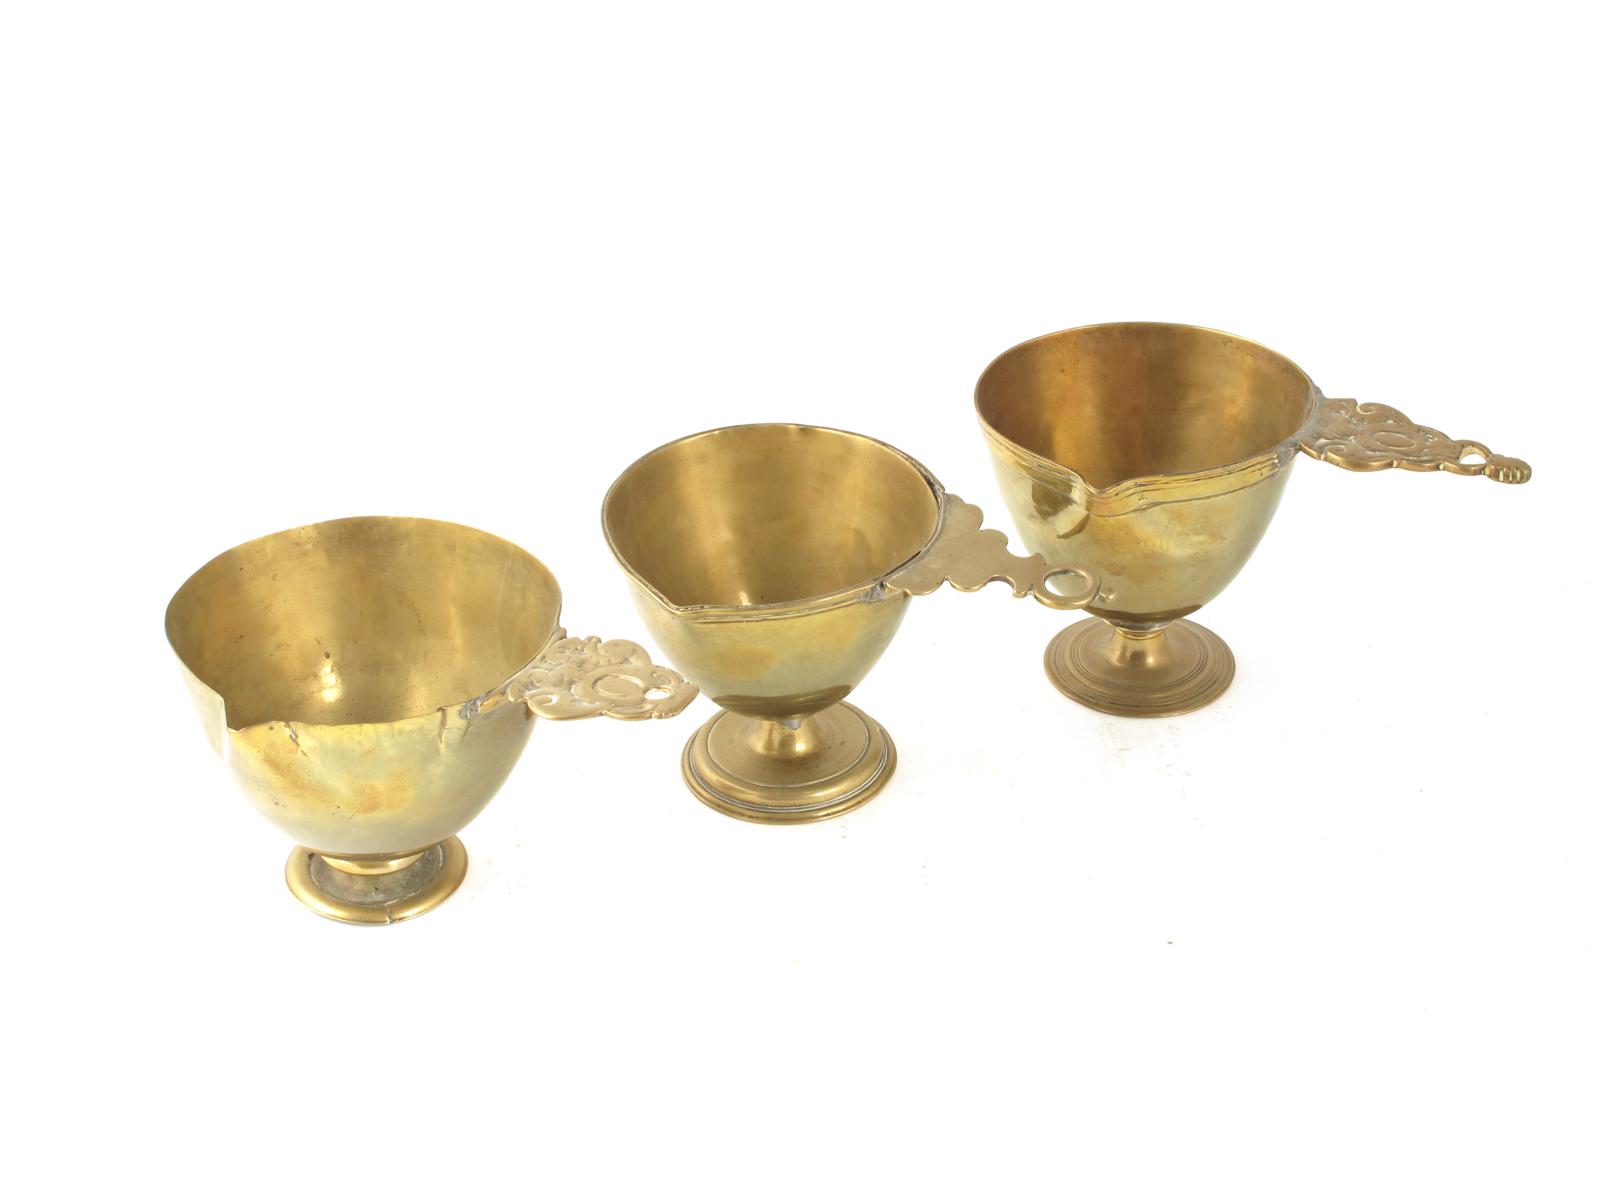 Three Dutch brass ecclesiastical spouted vessels, all with pierced handles, two with embossed